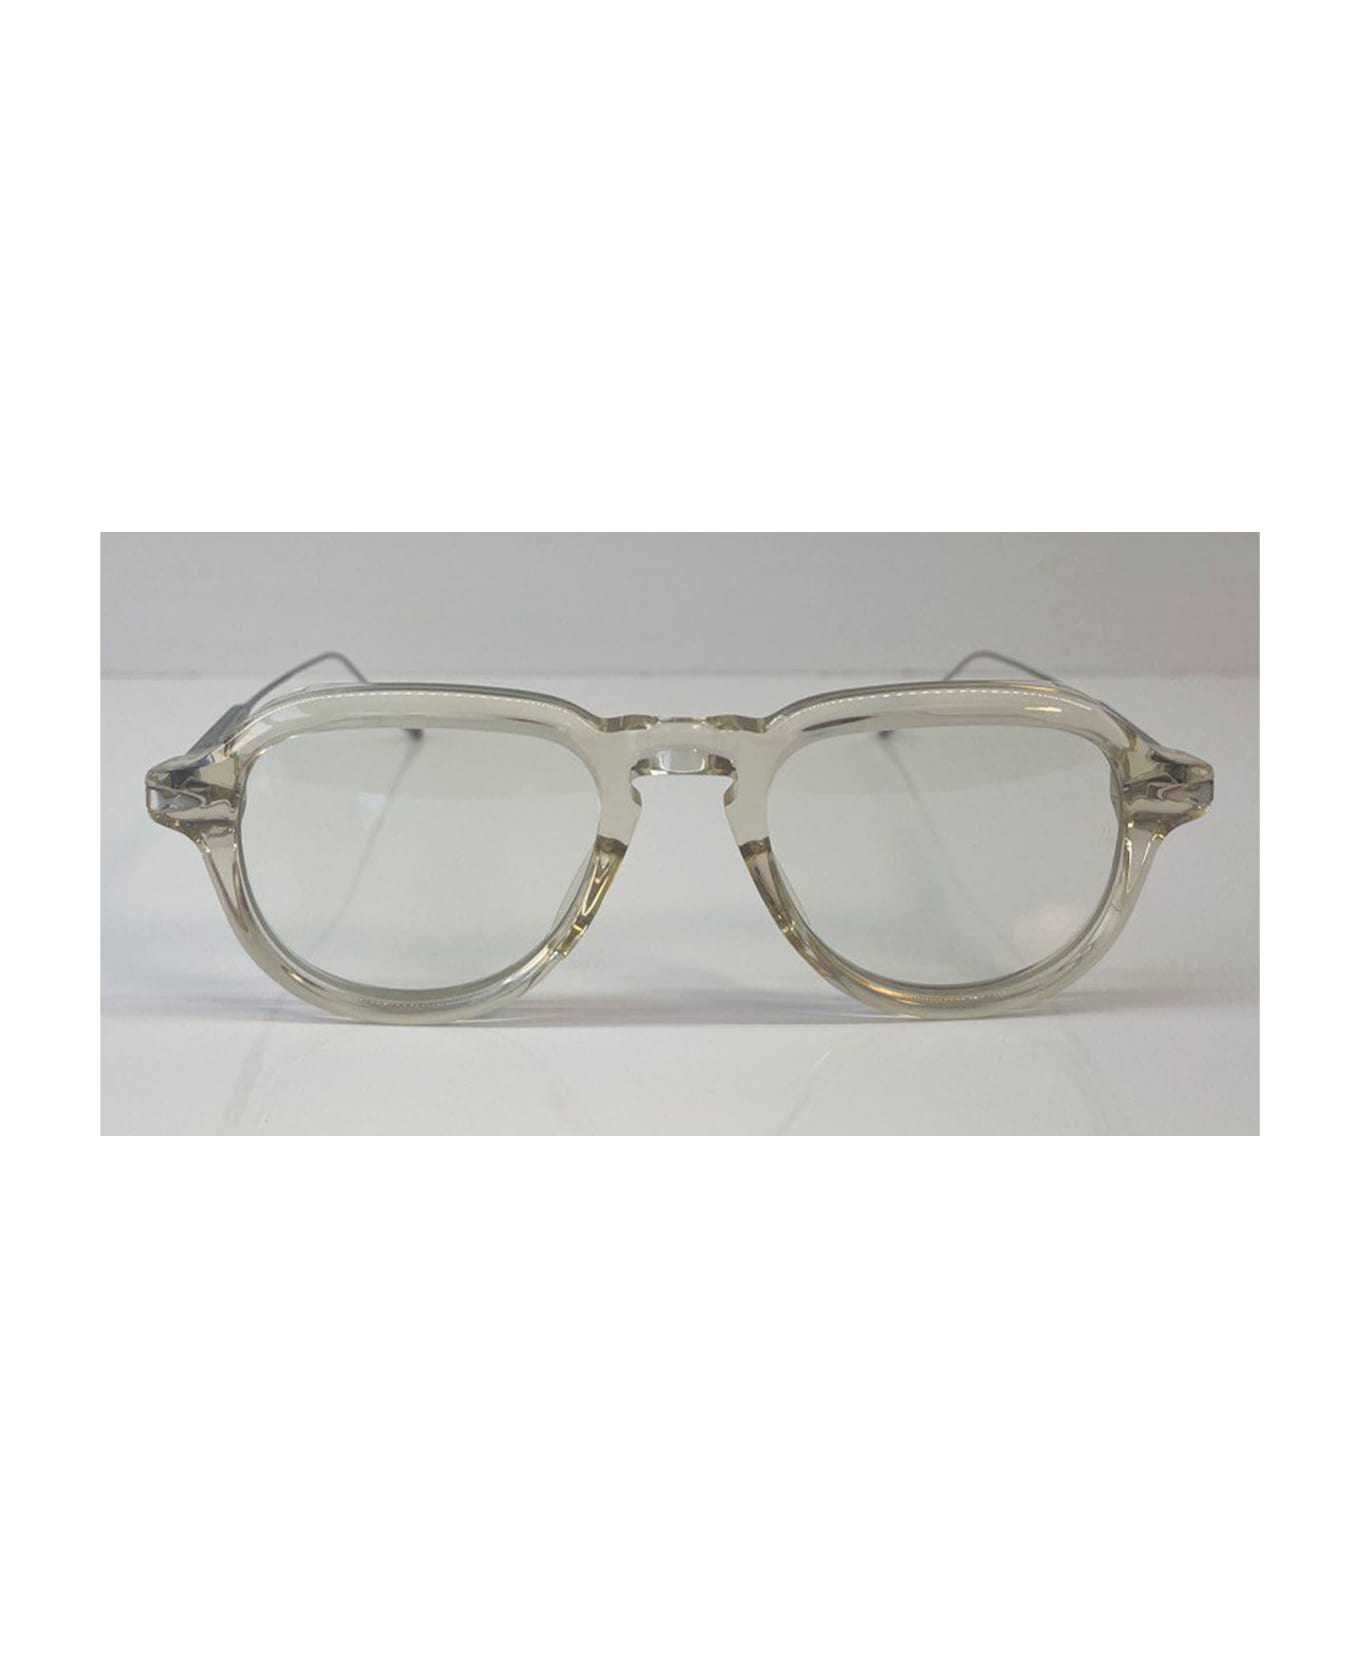 Jacques Marie Mage Jenkins - Beige Rx Glasses - beige アイウェア